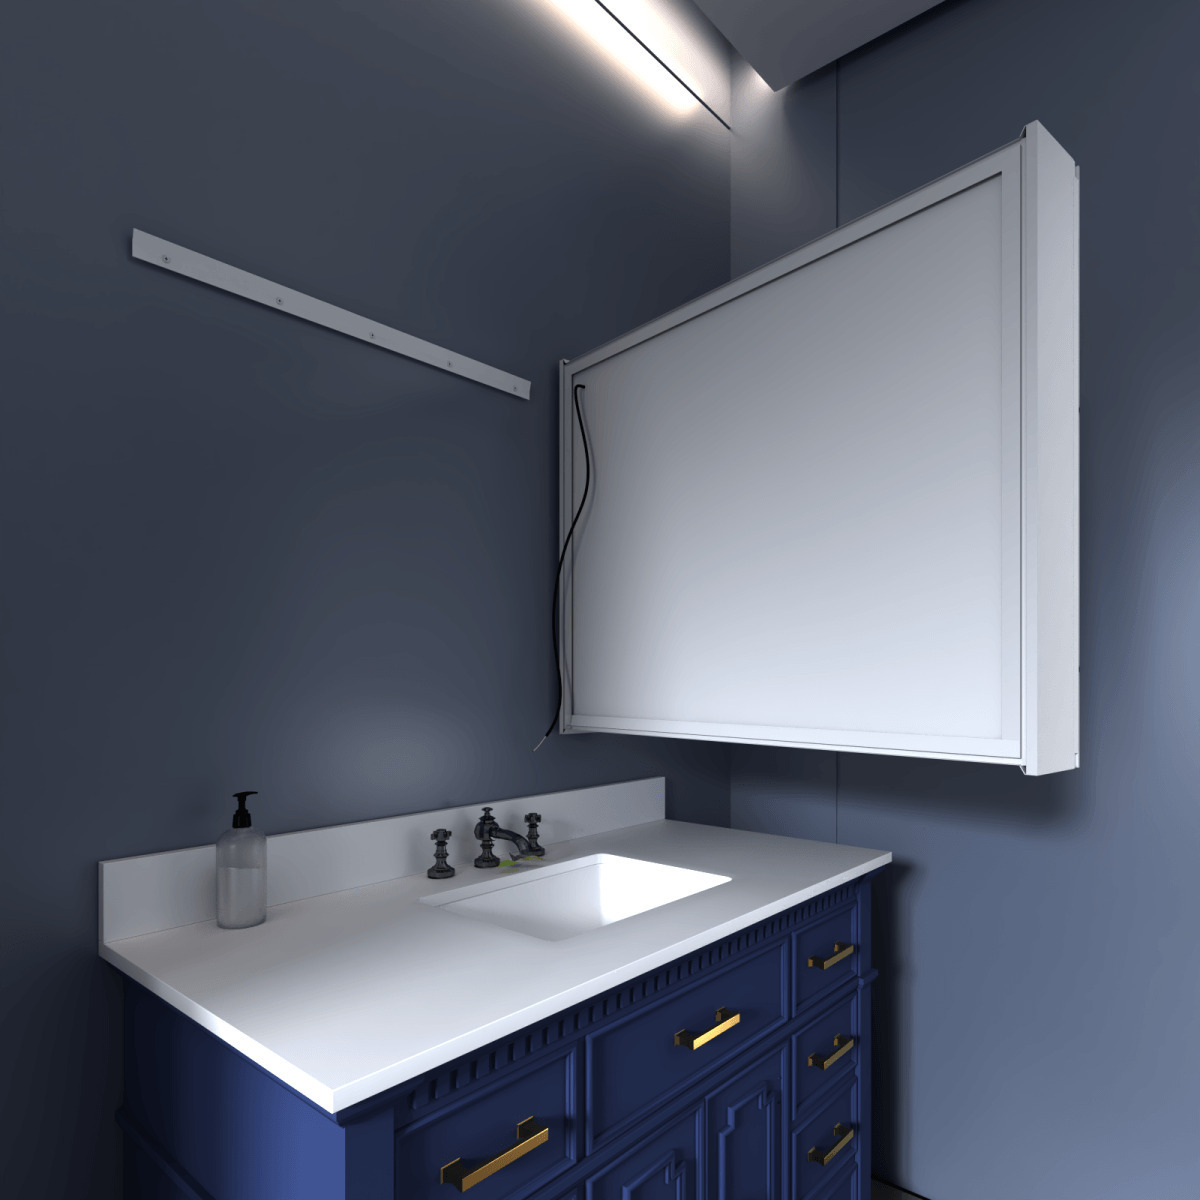 Boost-M2 20 W X 32 H Bathroom Narrow Light Medicine Cabinets With Vanity Mirror Recessed Or Surface - Hinge On Right Side